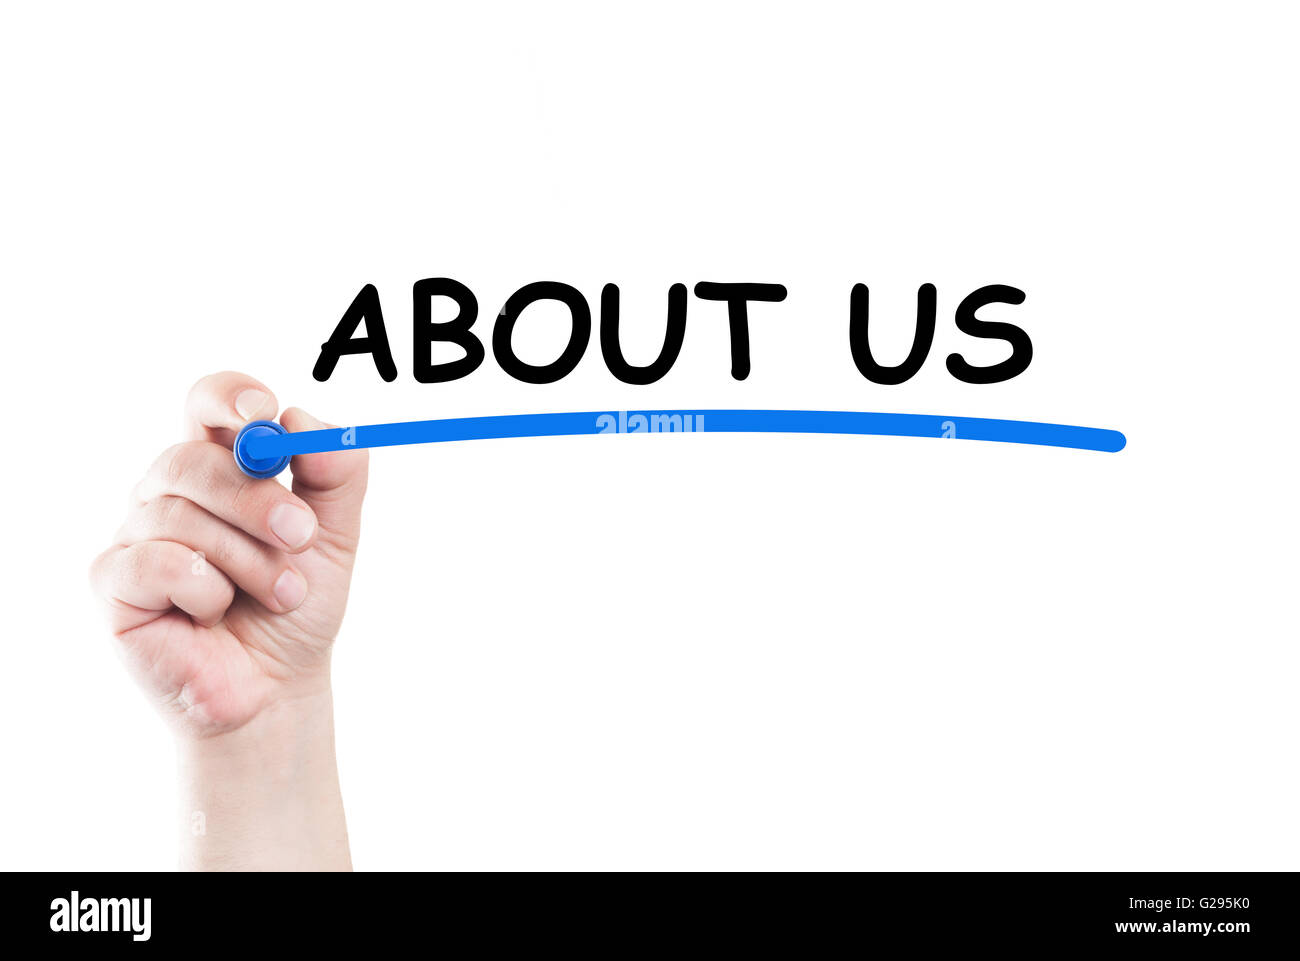 About us written by hand using a marker and underline on transparent wipe board with white background and copy space Stock Photo